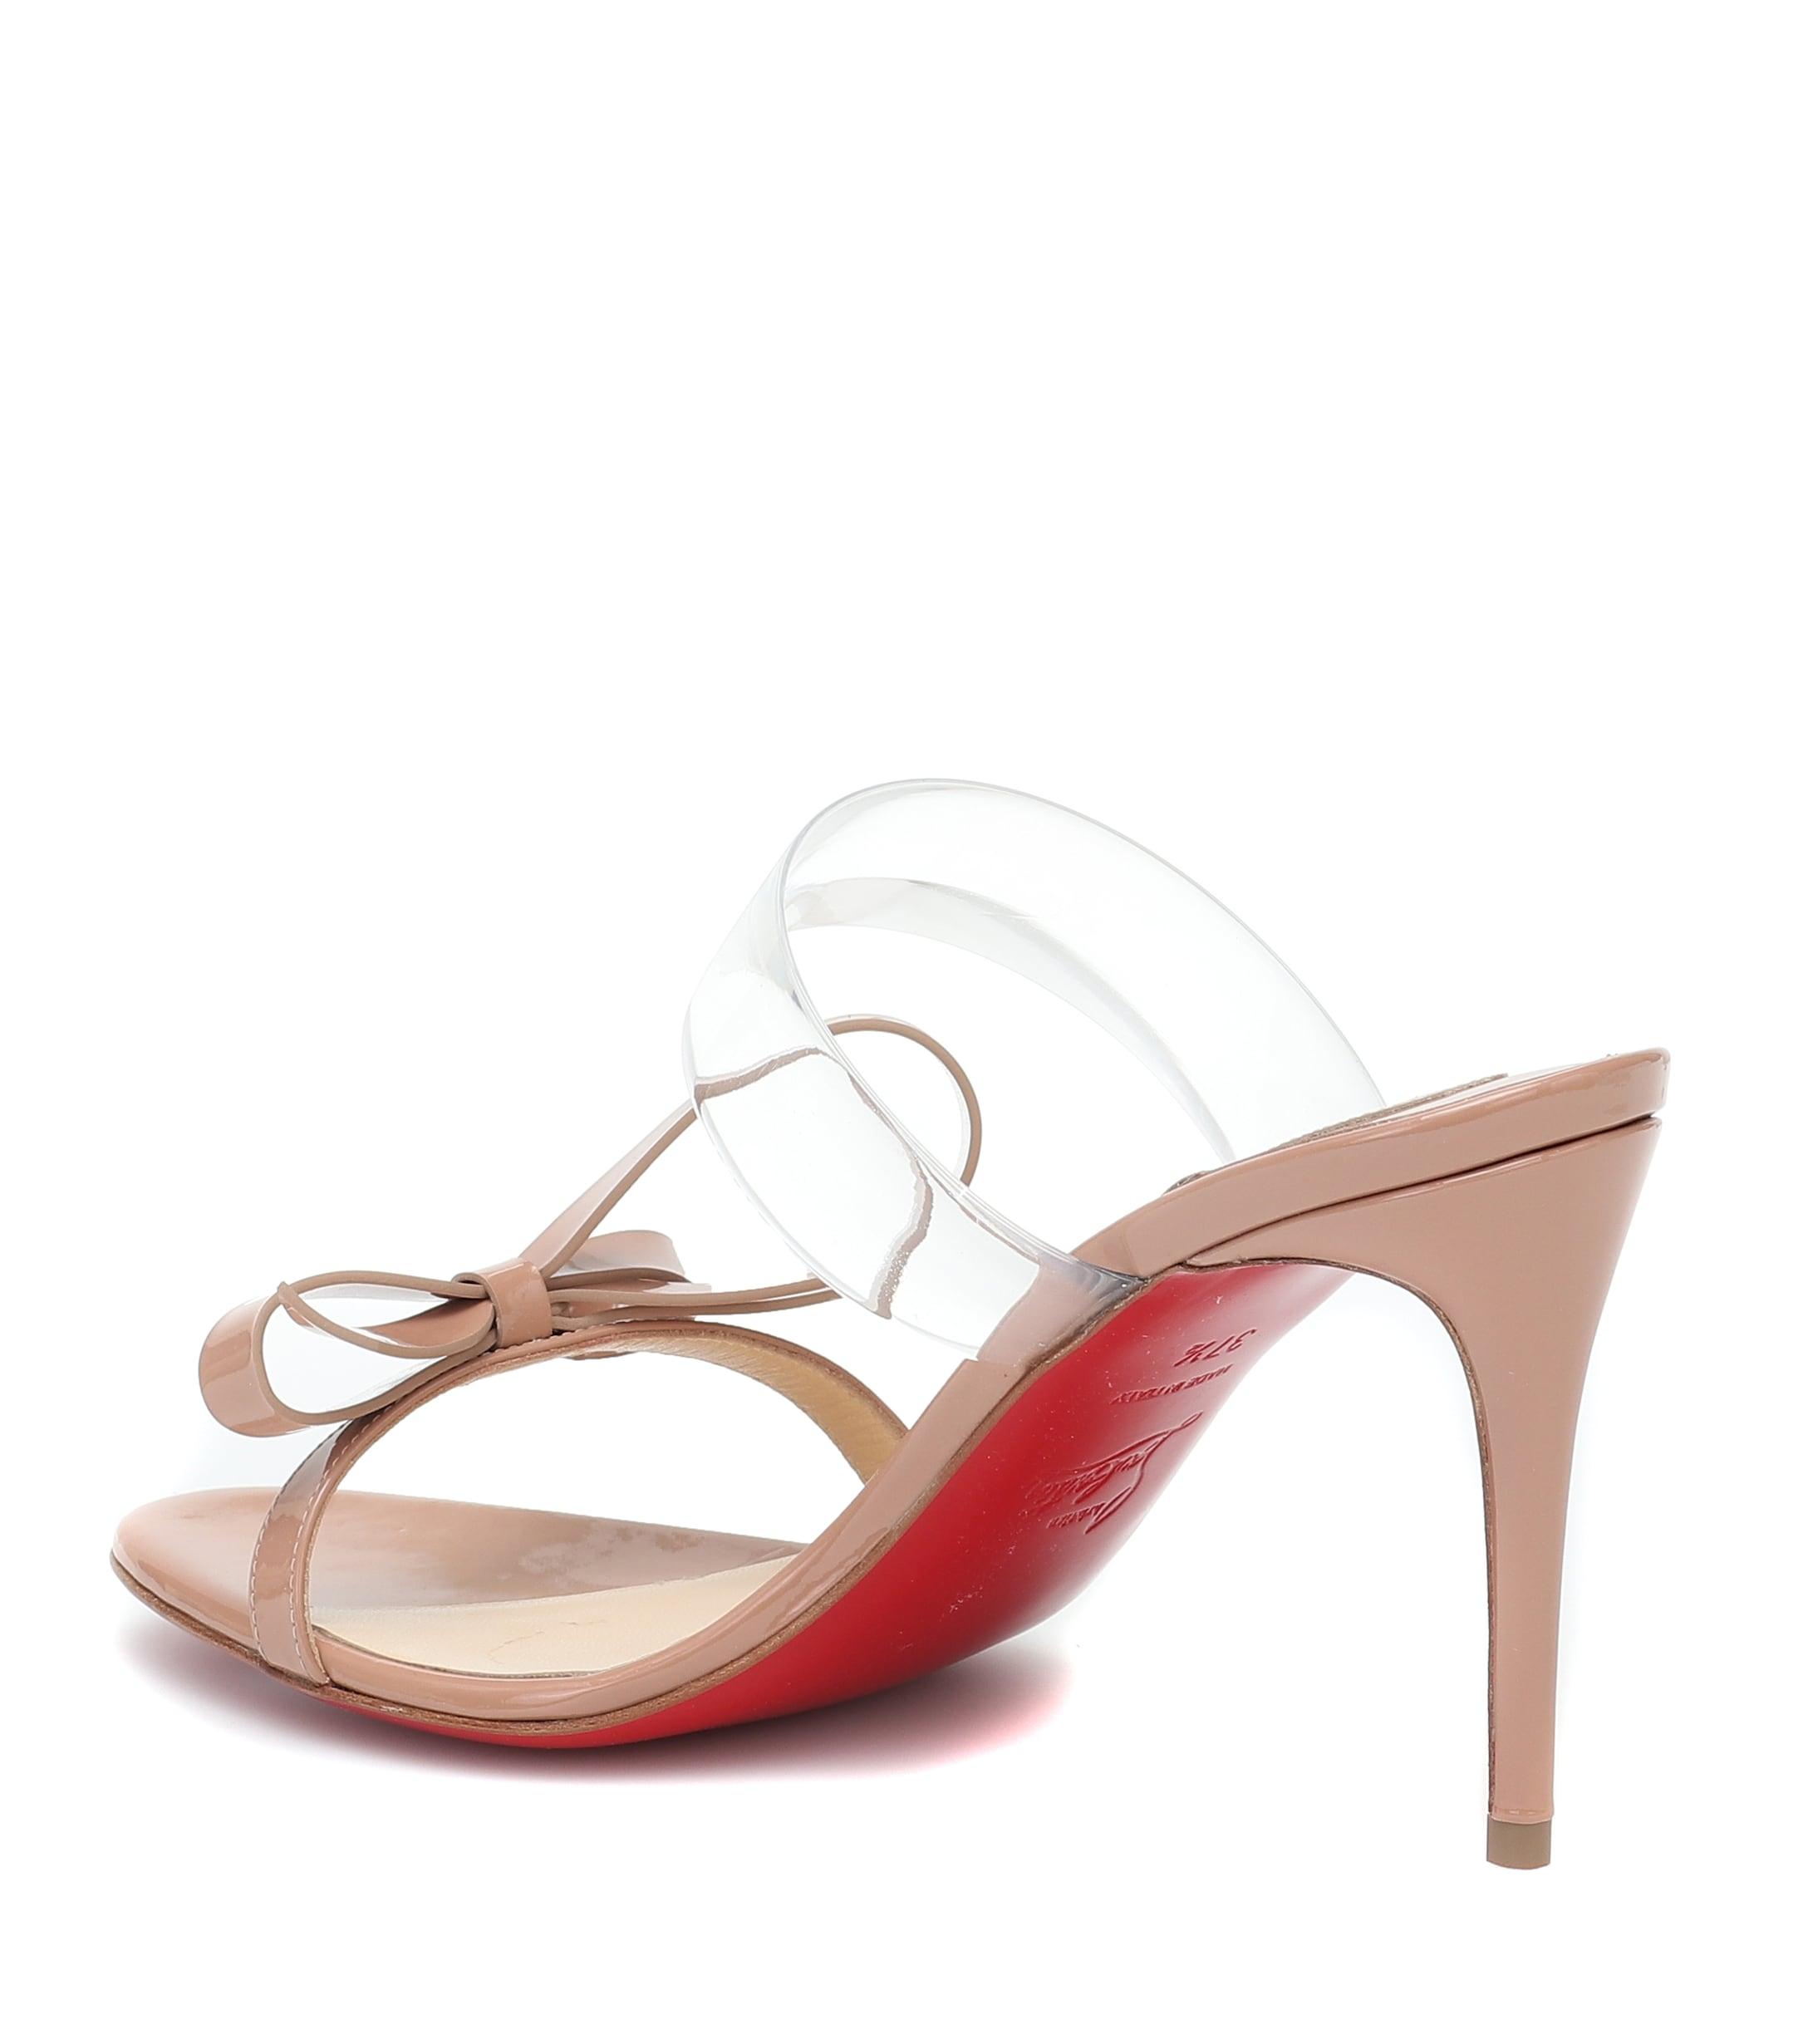 Christian Louboutin Just Nodo 85 Pvc And Patent Leather Sandals in Natural  | Lyst